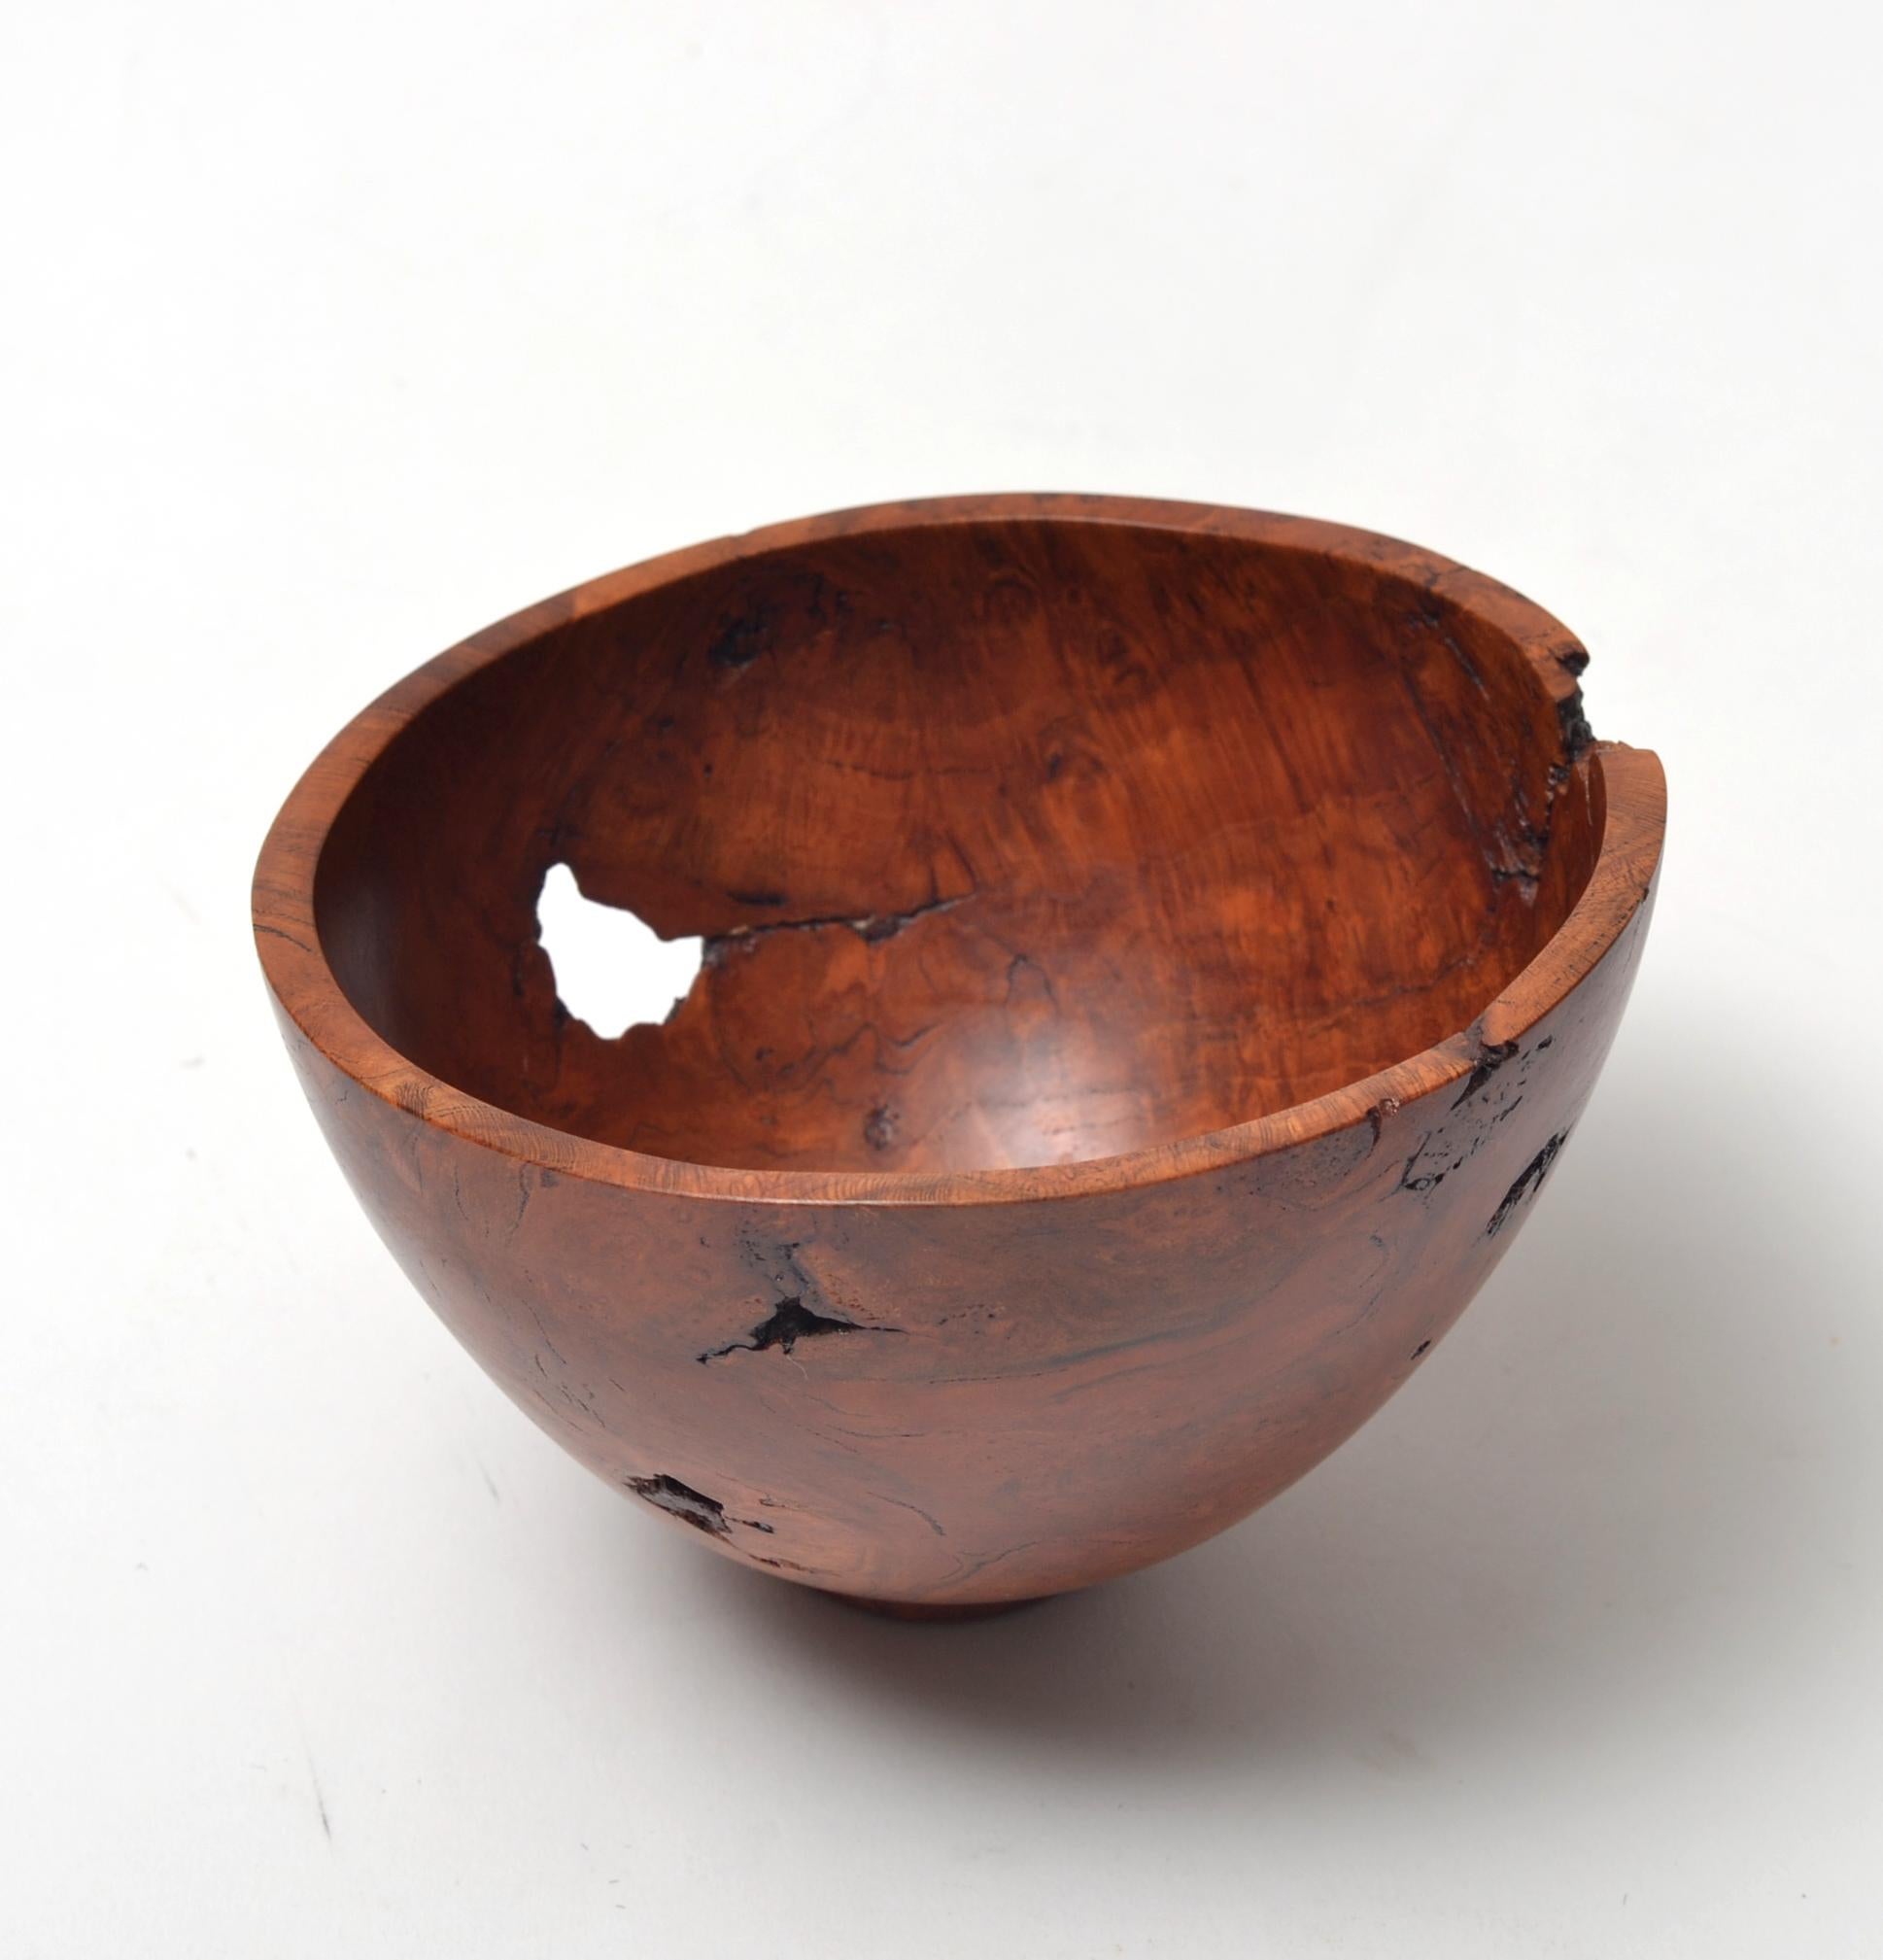 Decorative Wooden Bowl by Dustin Coates (Arts and Crafts) im Angebot